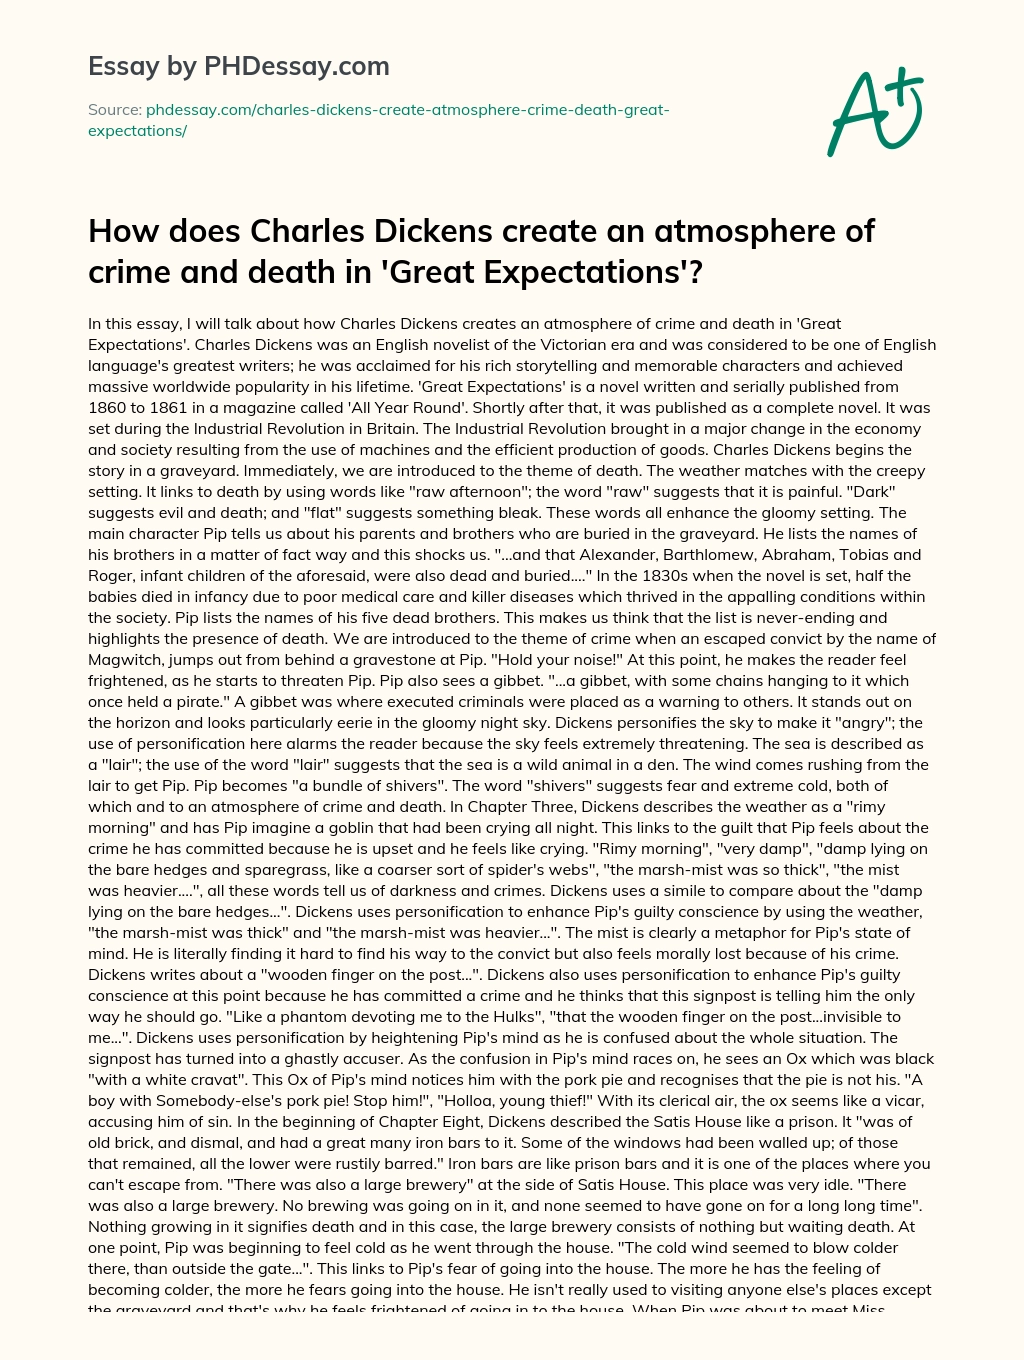 How does Charles Dickens create an atmosphere of crime and death in ‘Great Expectations’? essay